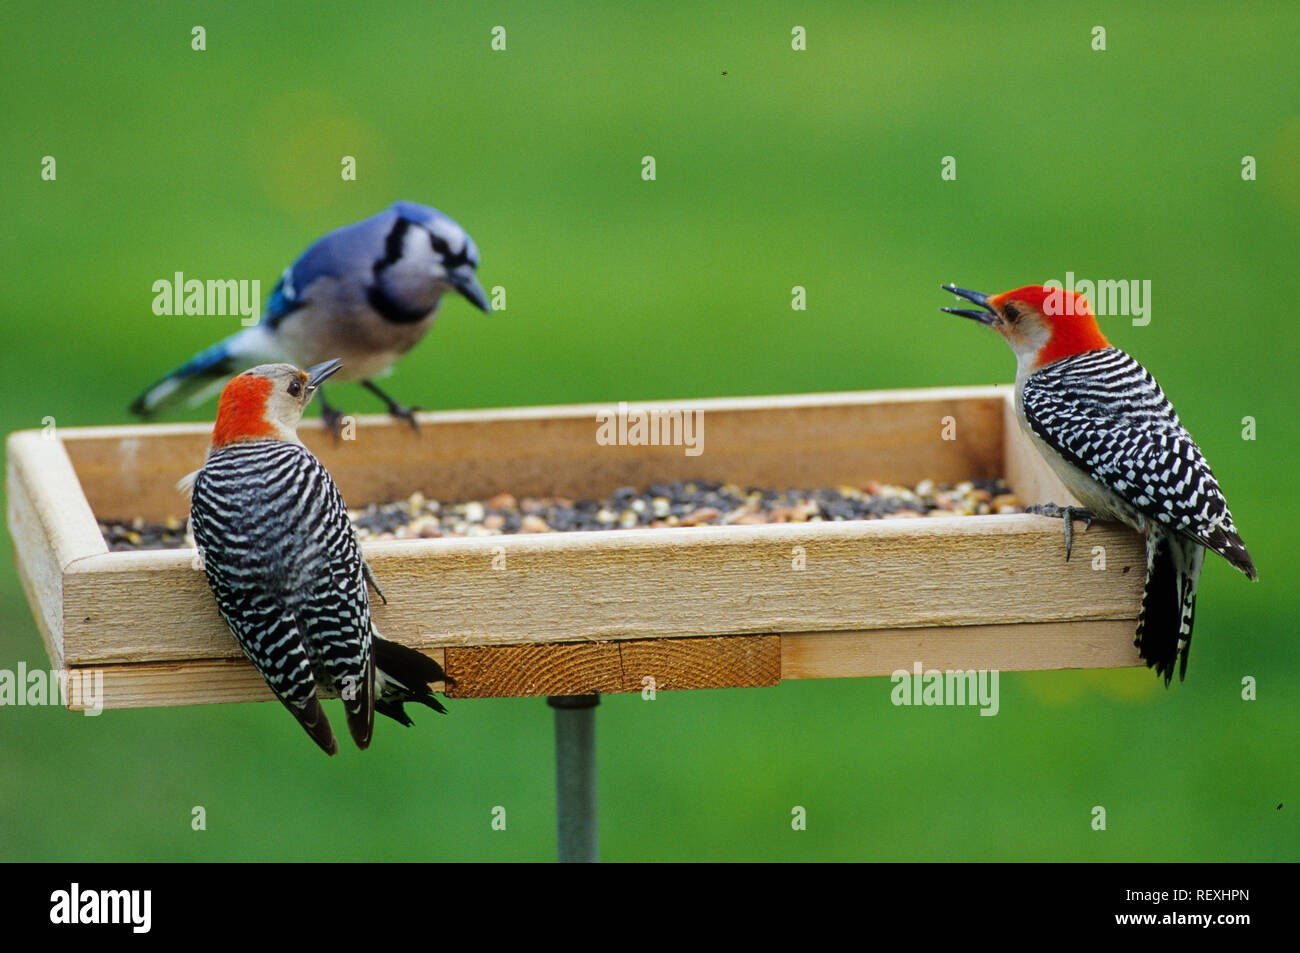 Red Bellied Woodpeckers Melanerpes Carolinus Male Female Blue Jay Cyanocitta Cristata At Tray Feeder Marion Co Il Stock Photo Alamy